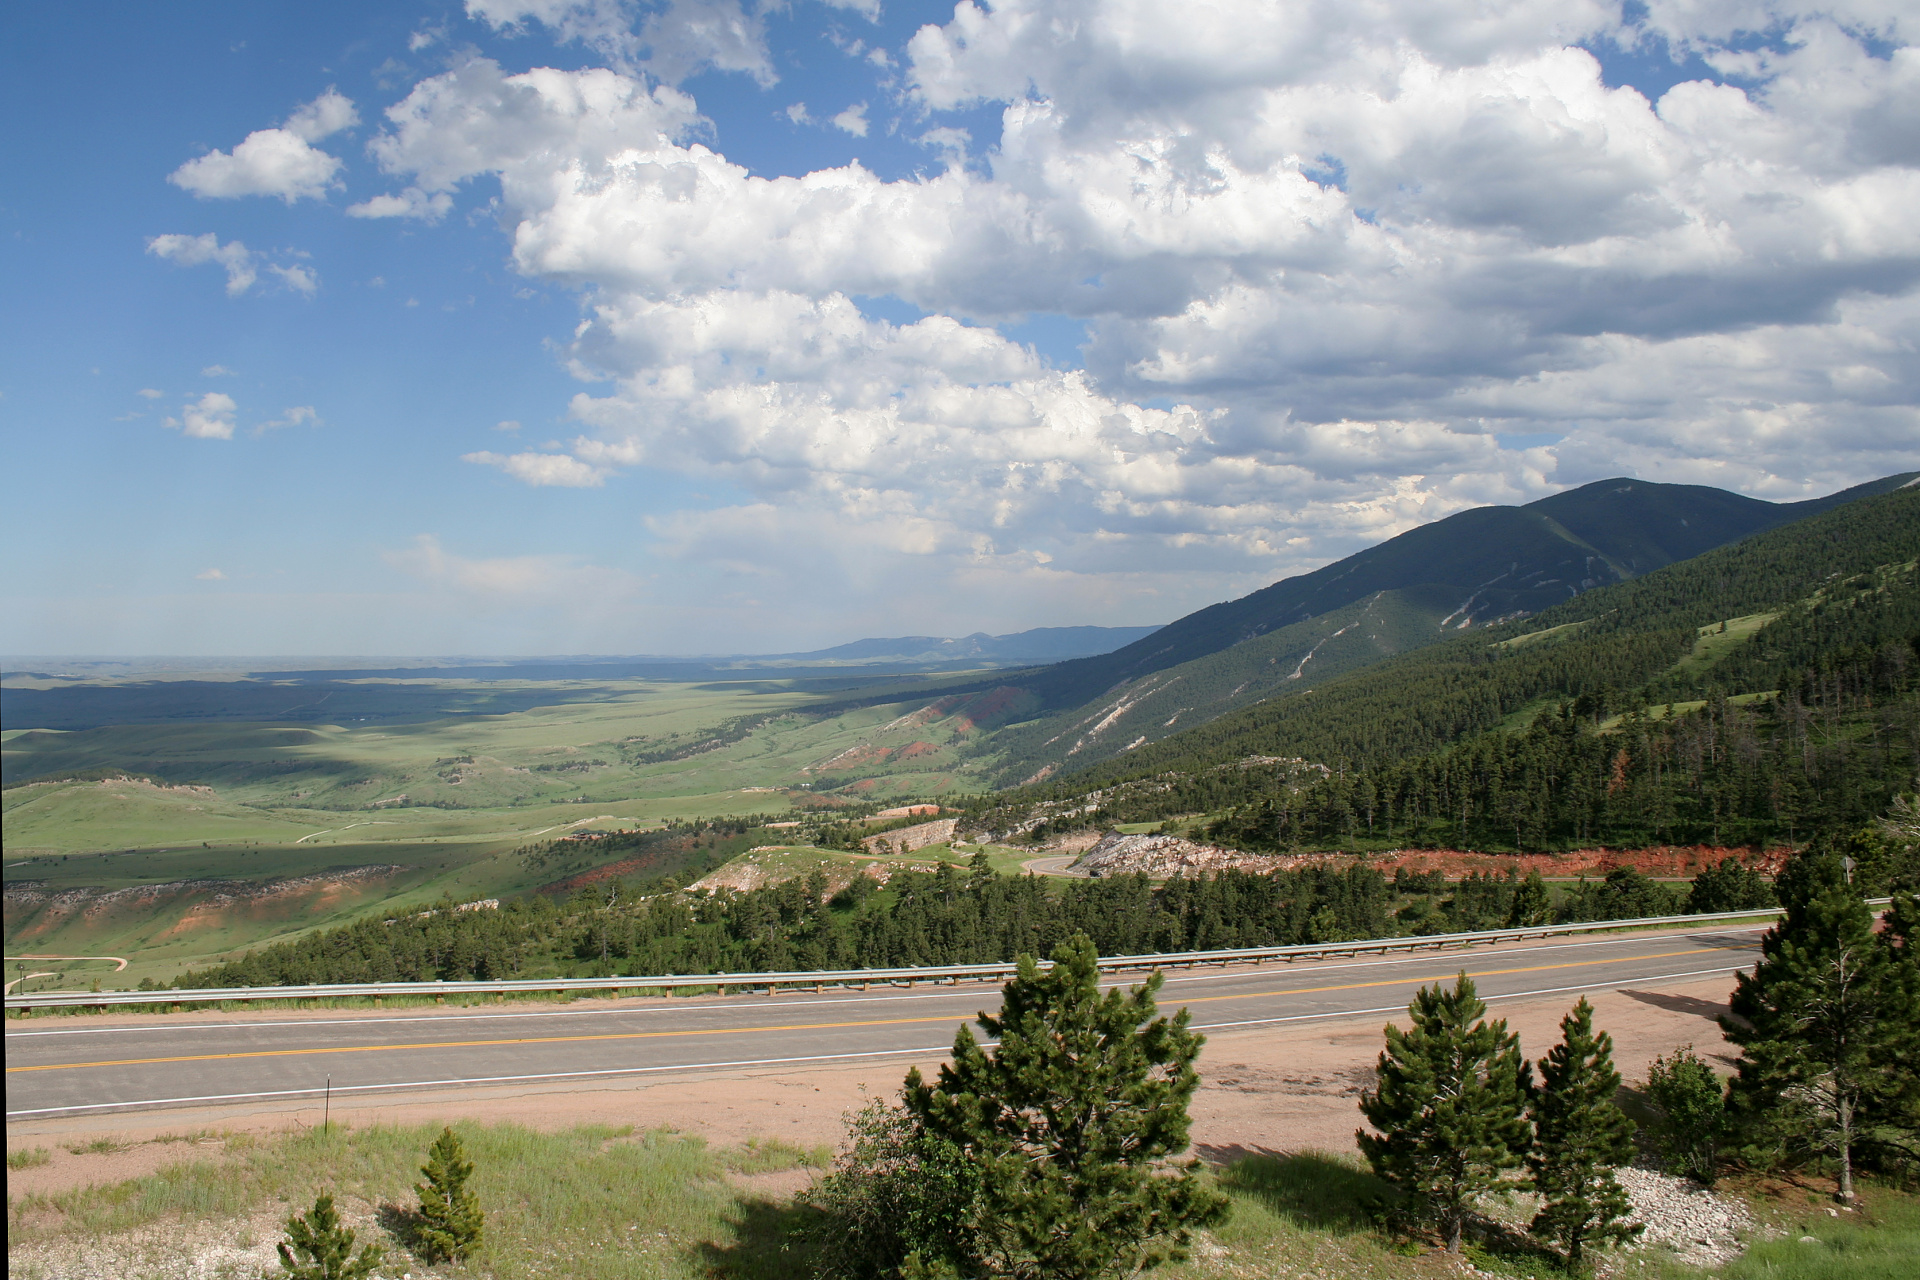 Hogback (Travels » US Trip 2: Cheyenne Epic » The Country » Bighorn Mountains)